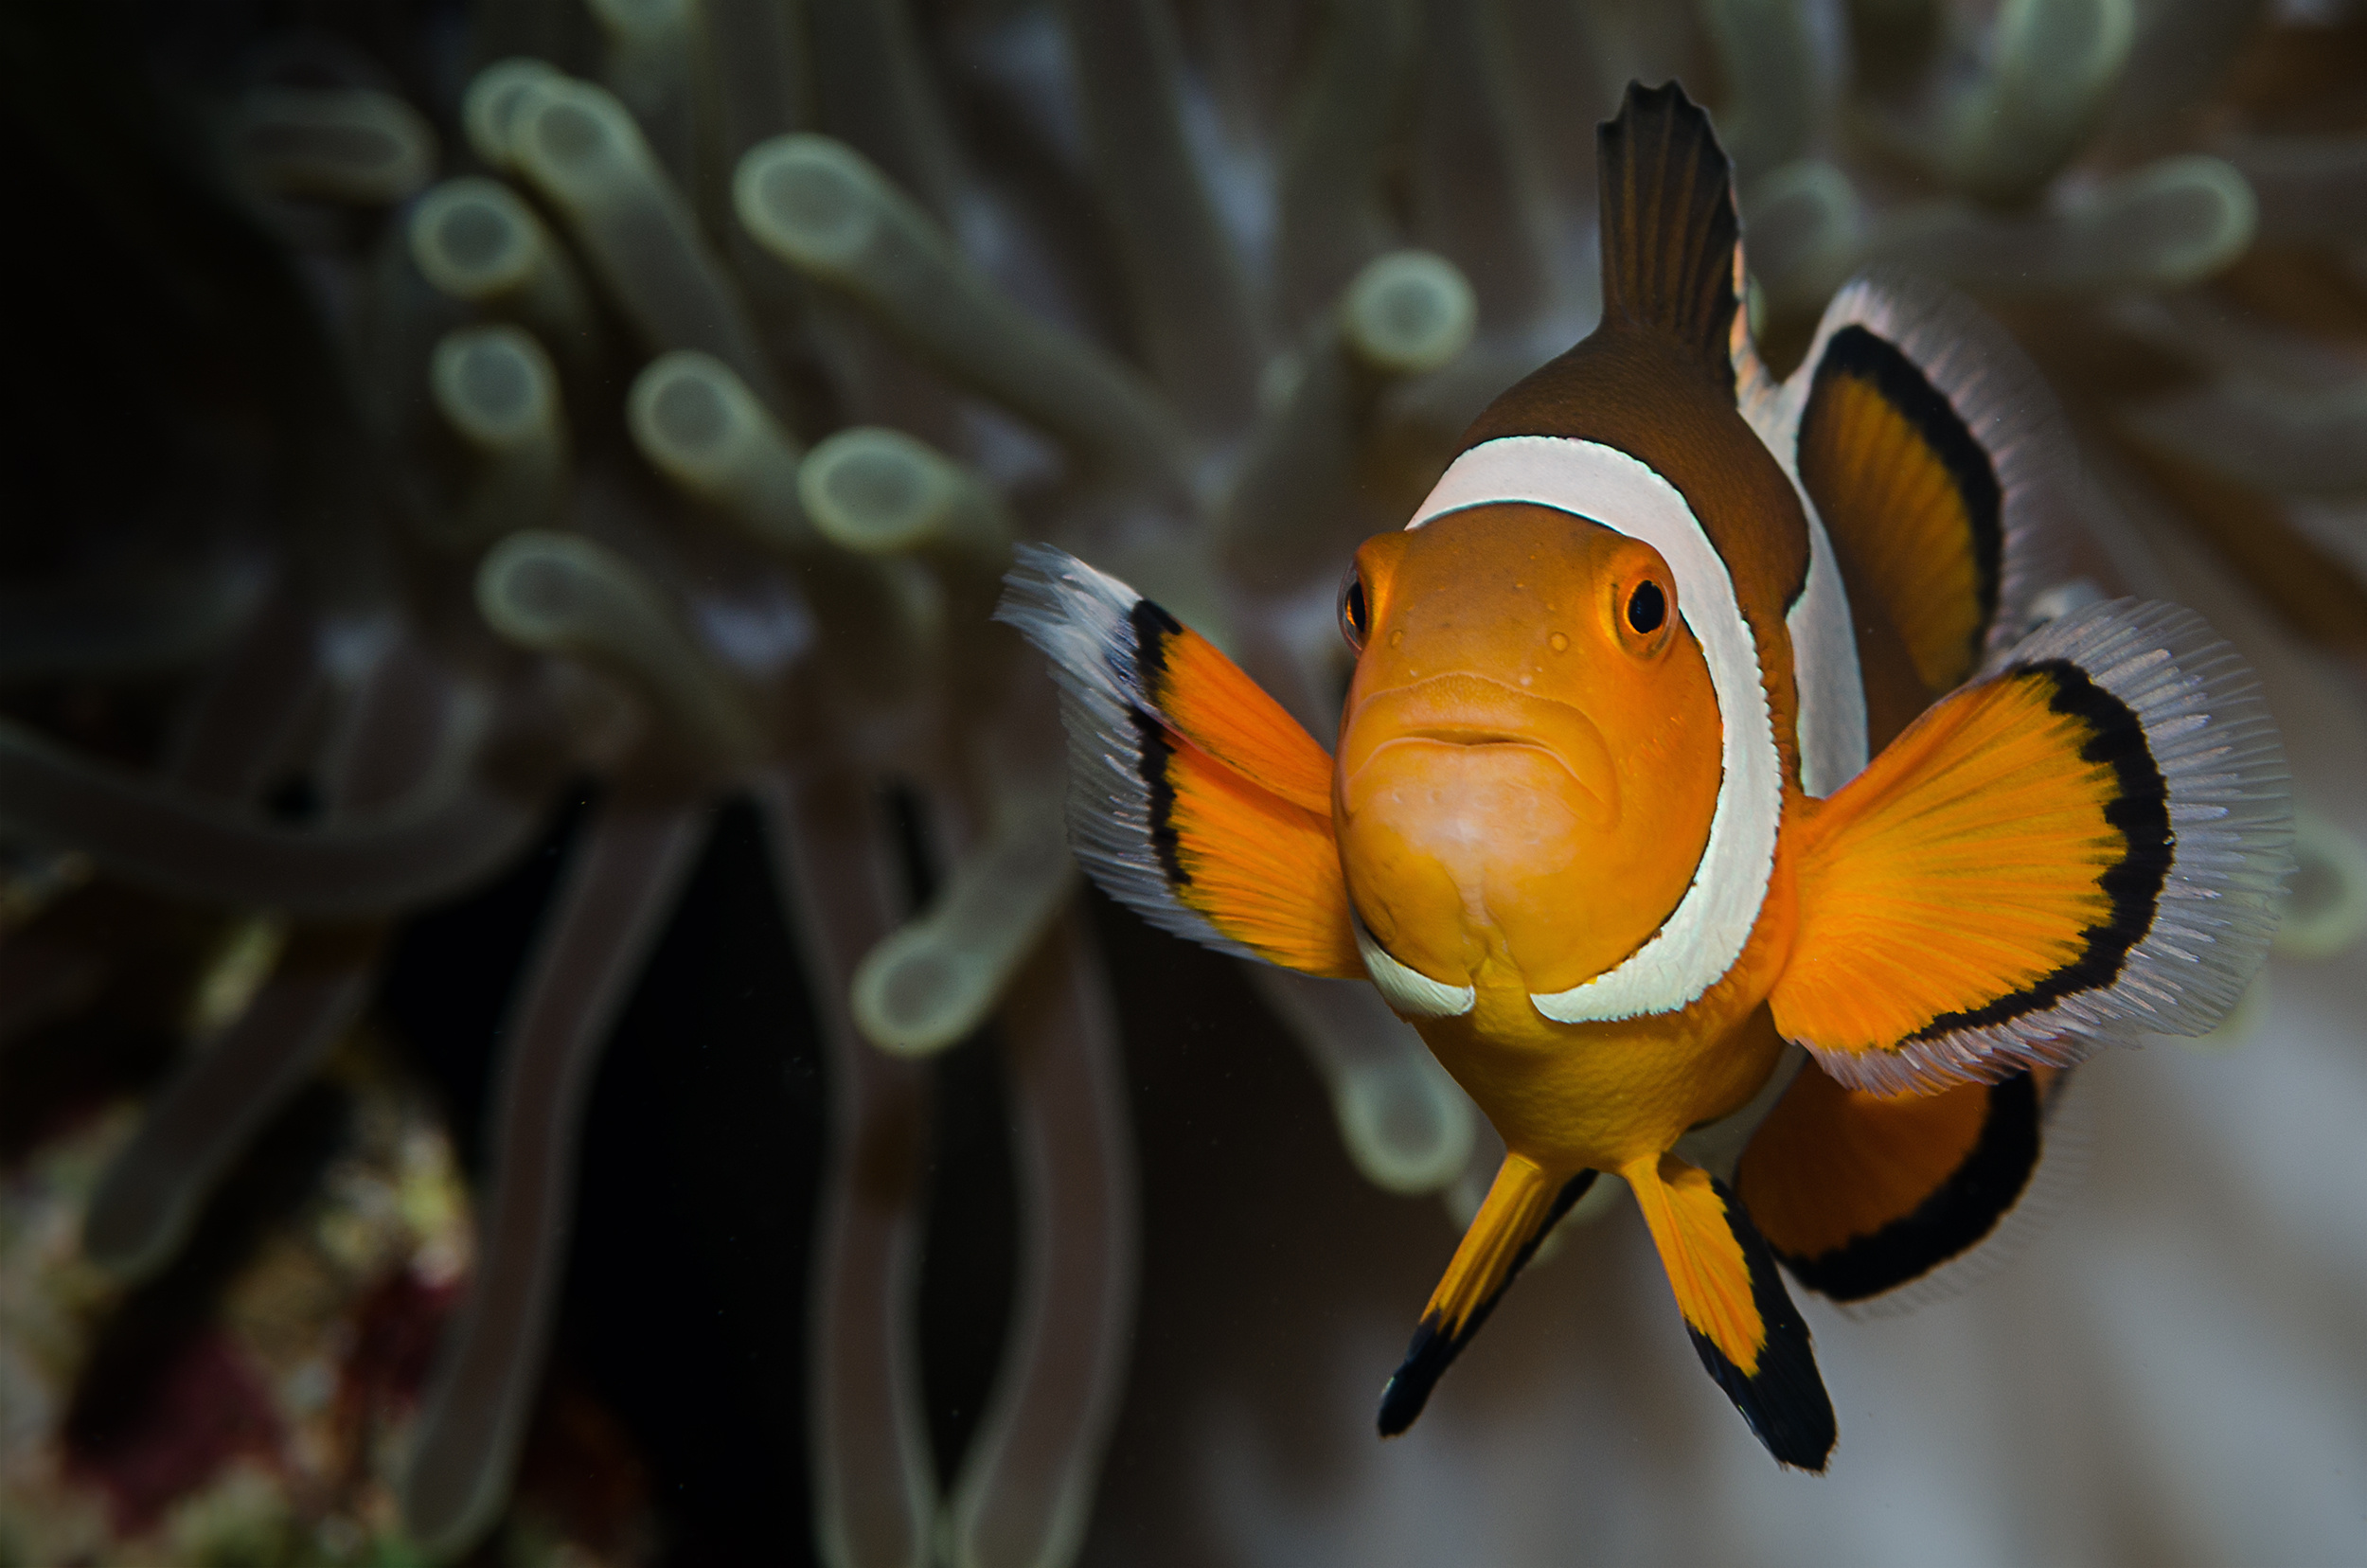 Clown Fish: Protandrous hermaphrodites, Have the ability to change their sex to female. 2500x1660 HD Wallpaper.